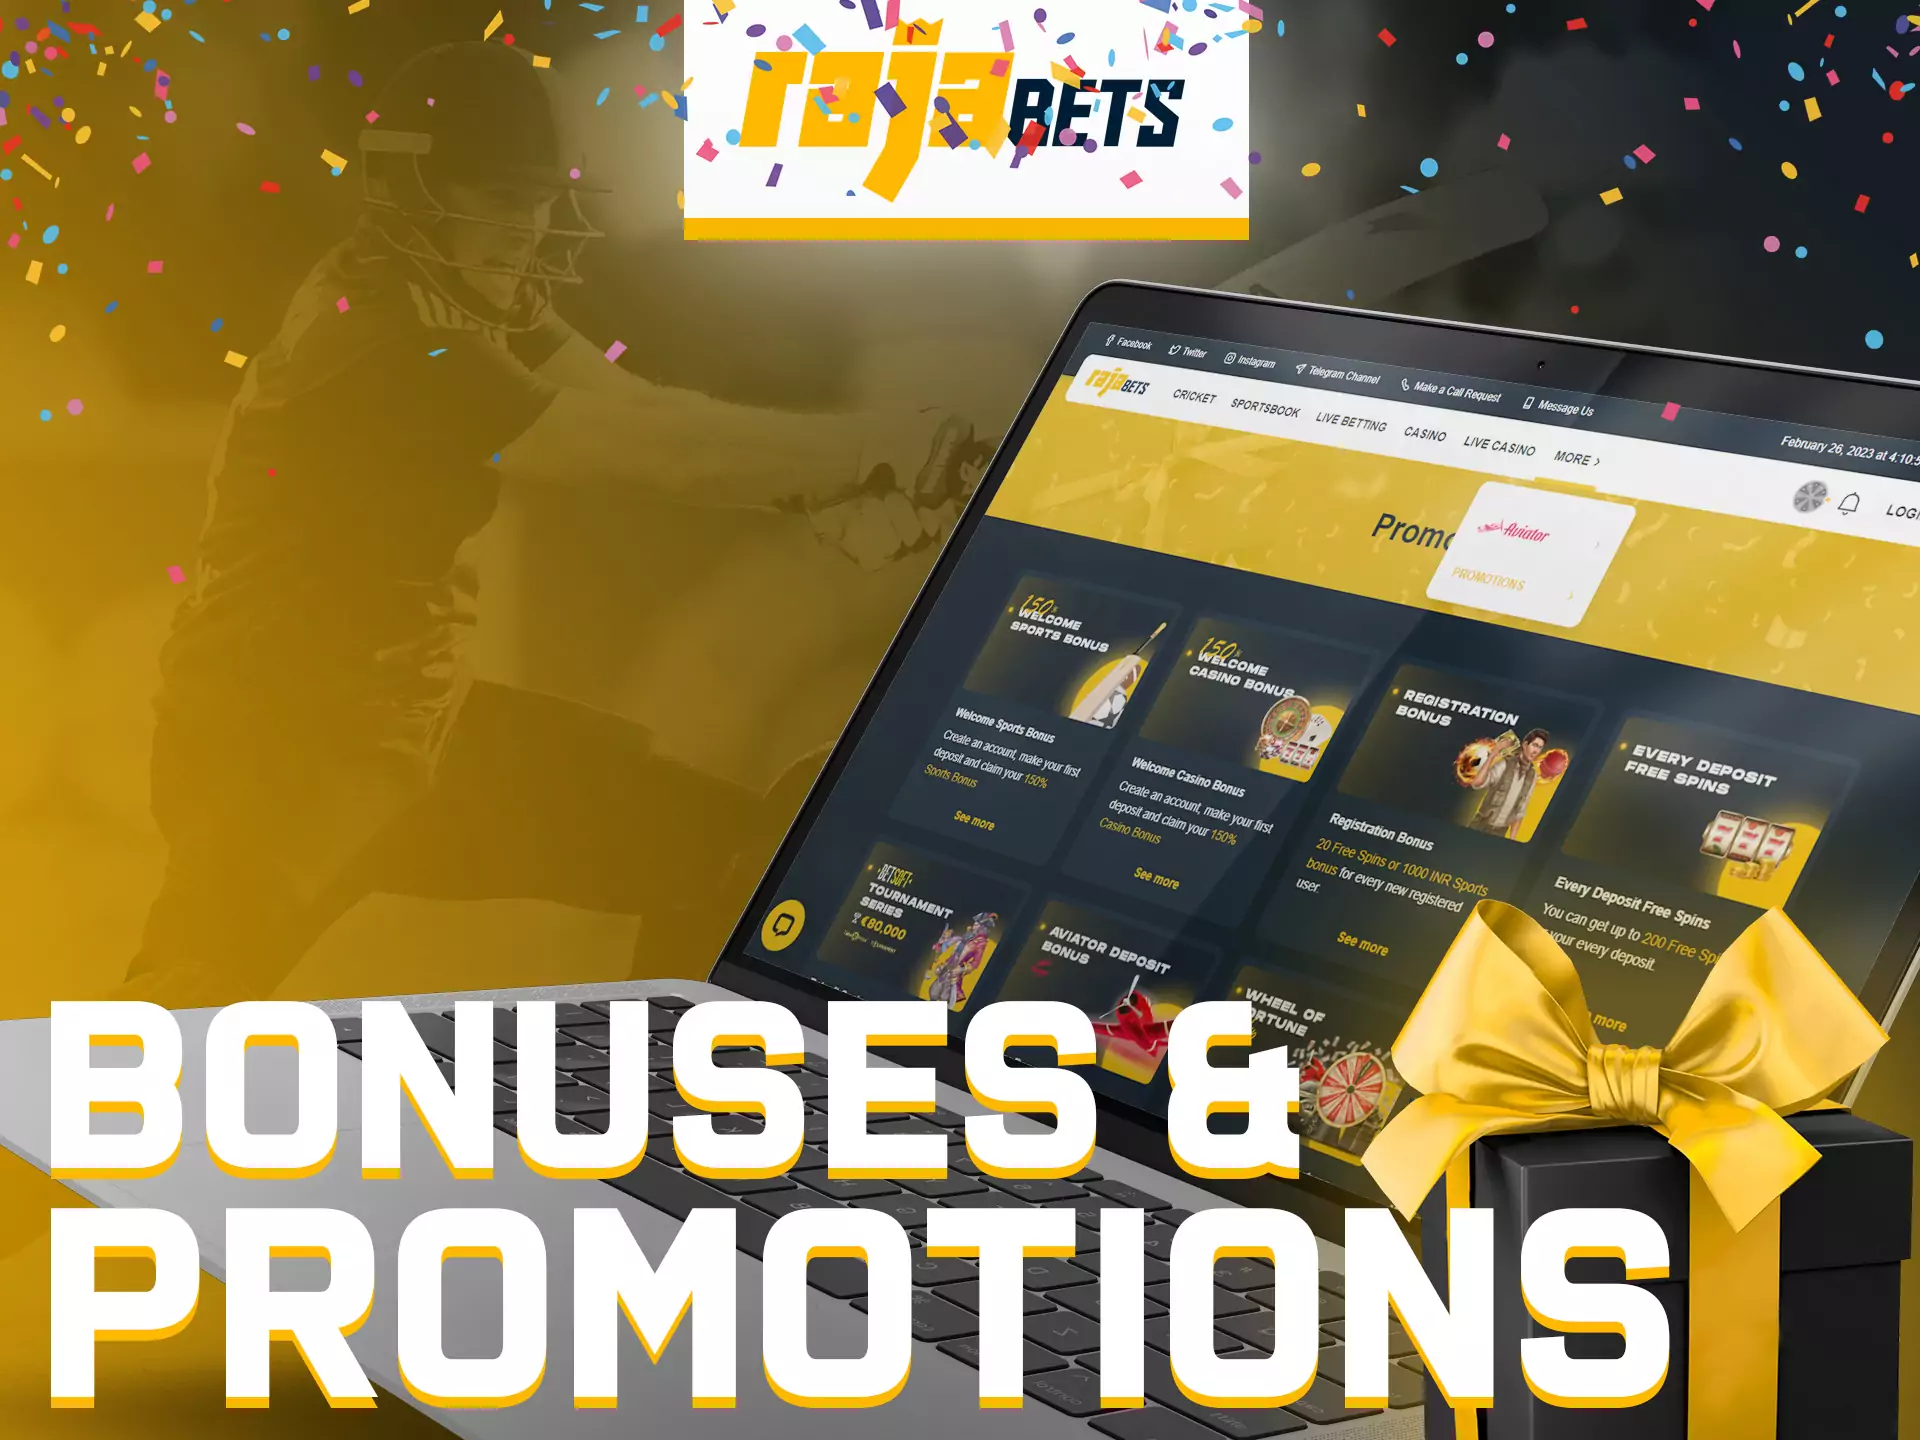 You can get lots of bonuses and promotions on Rajabets.